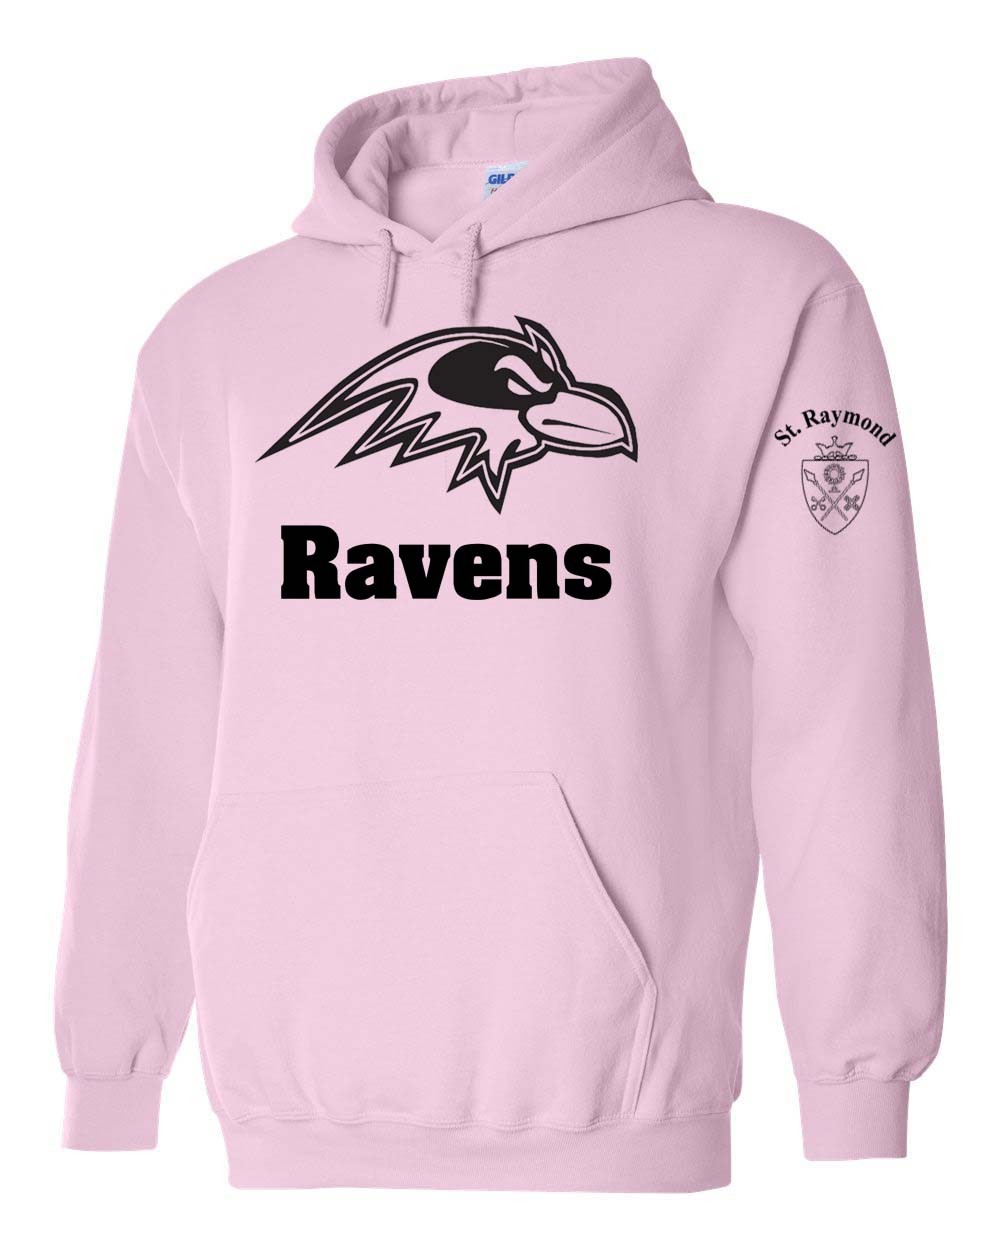 STAFF SRS Pullover Hoodie w/ Raven Logo - Please Allow 2-3 Weeks for Delivery